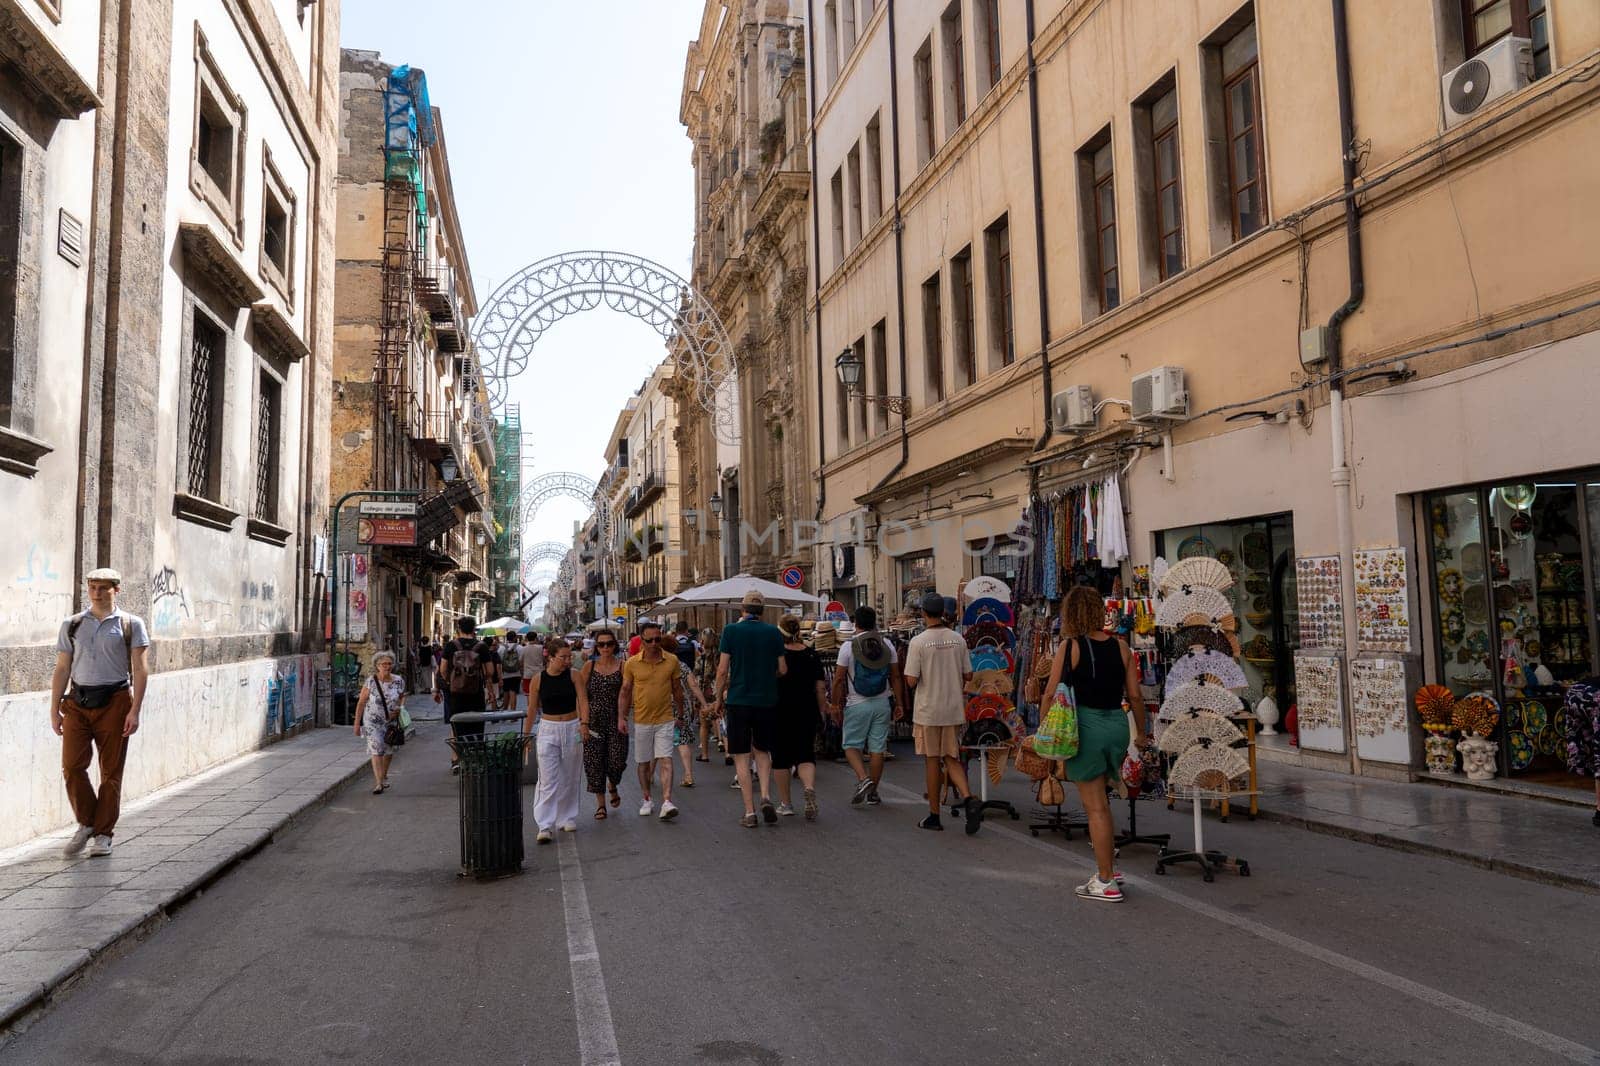 Palermo, Italy - July 20, 2023: People on a main pedestrian and shopping street in the historic city centre